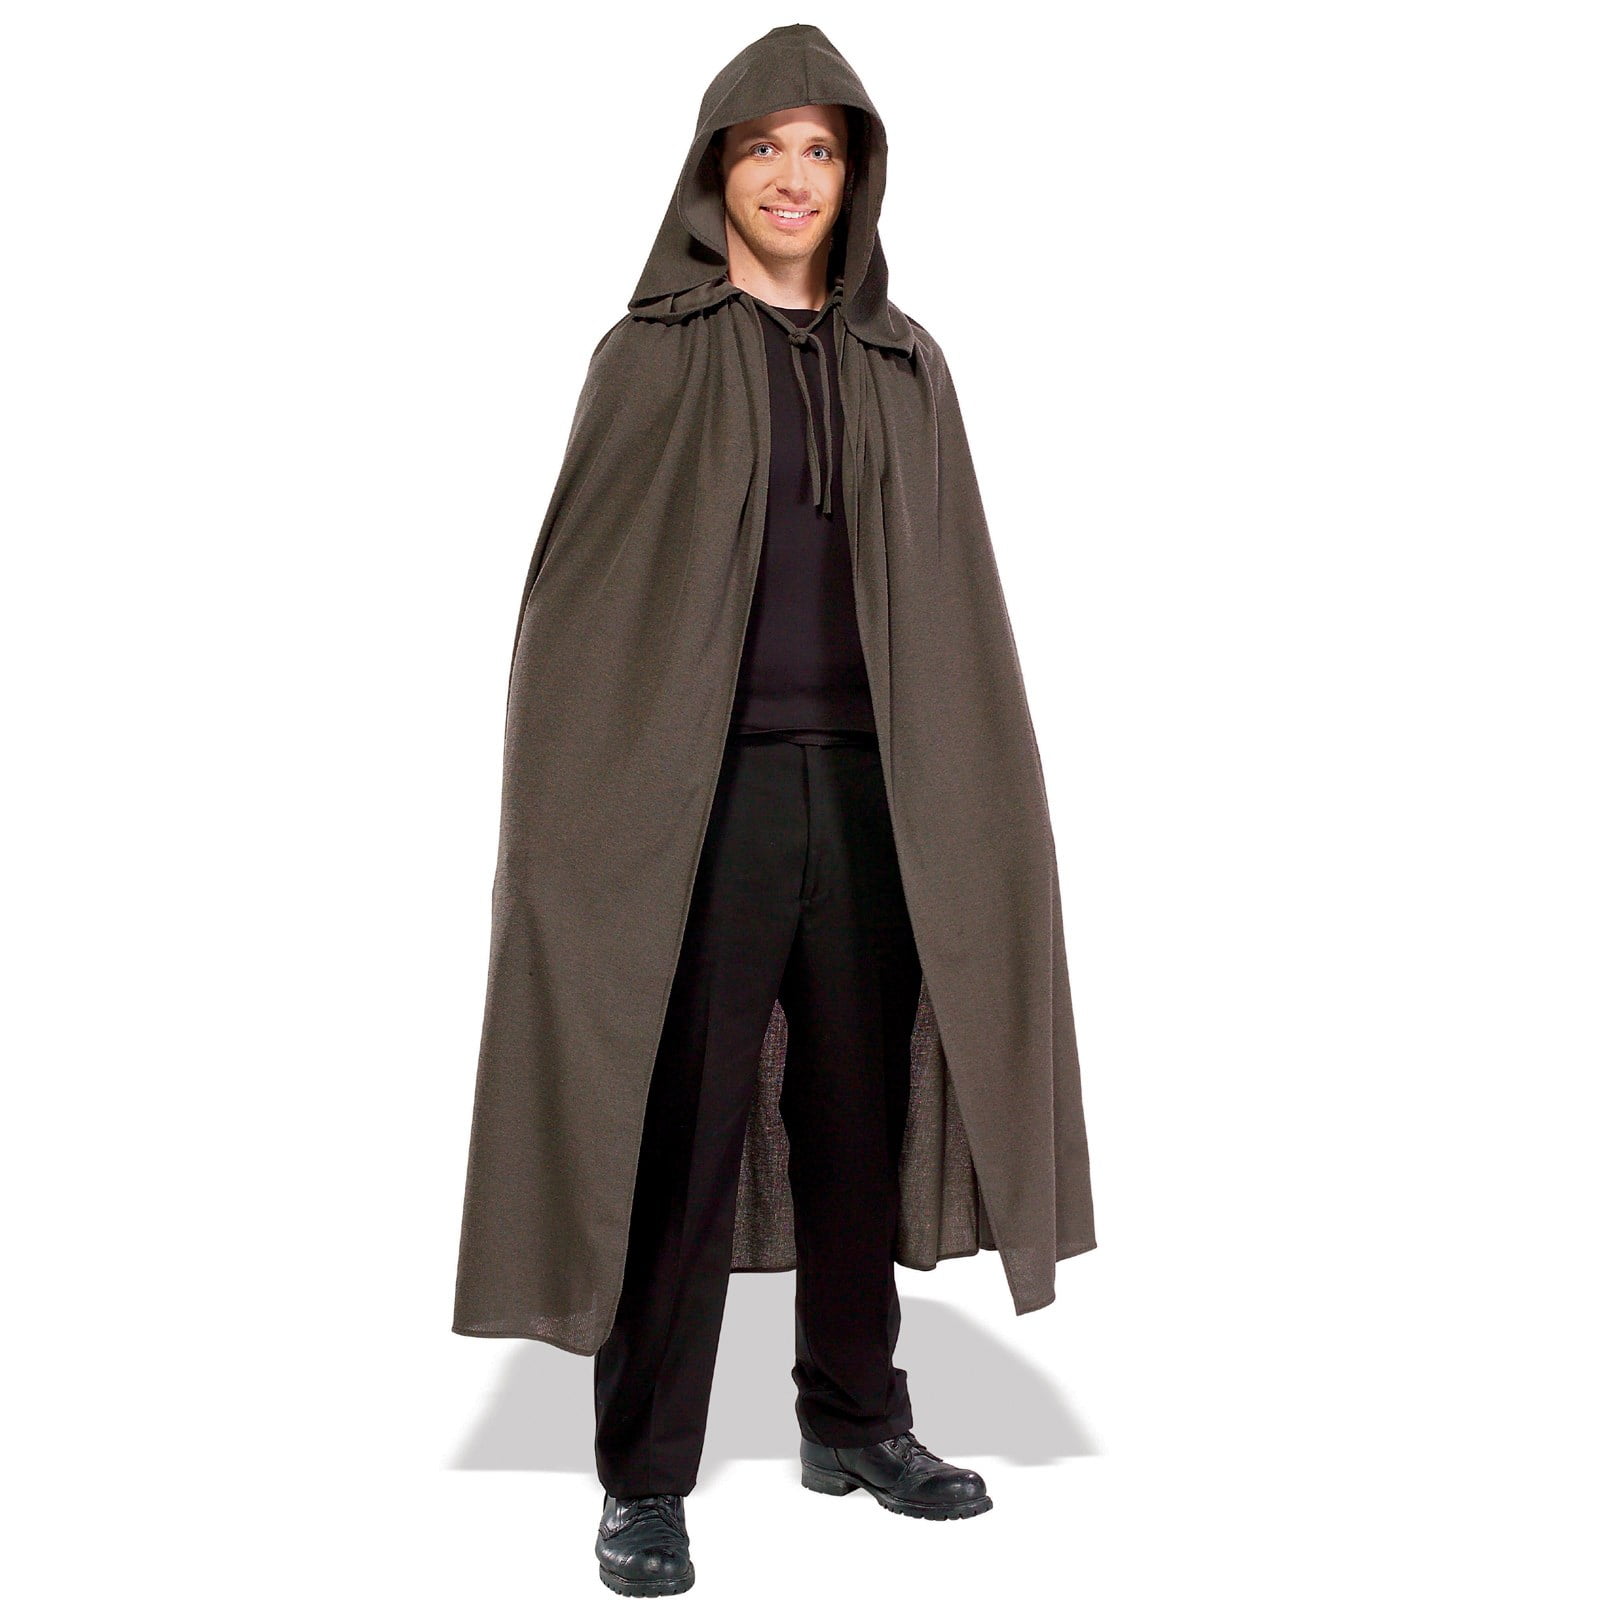 The Lord Of The Rings Elven Cloak Adult - Walmart.com.